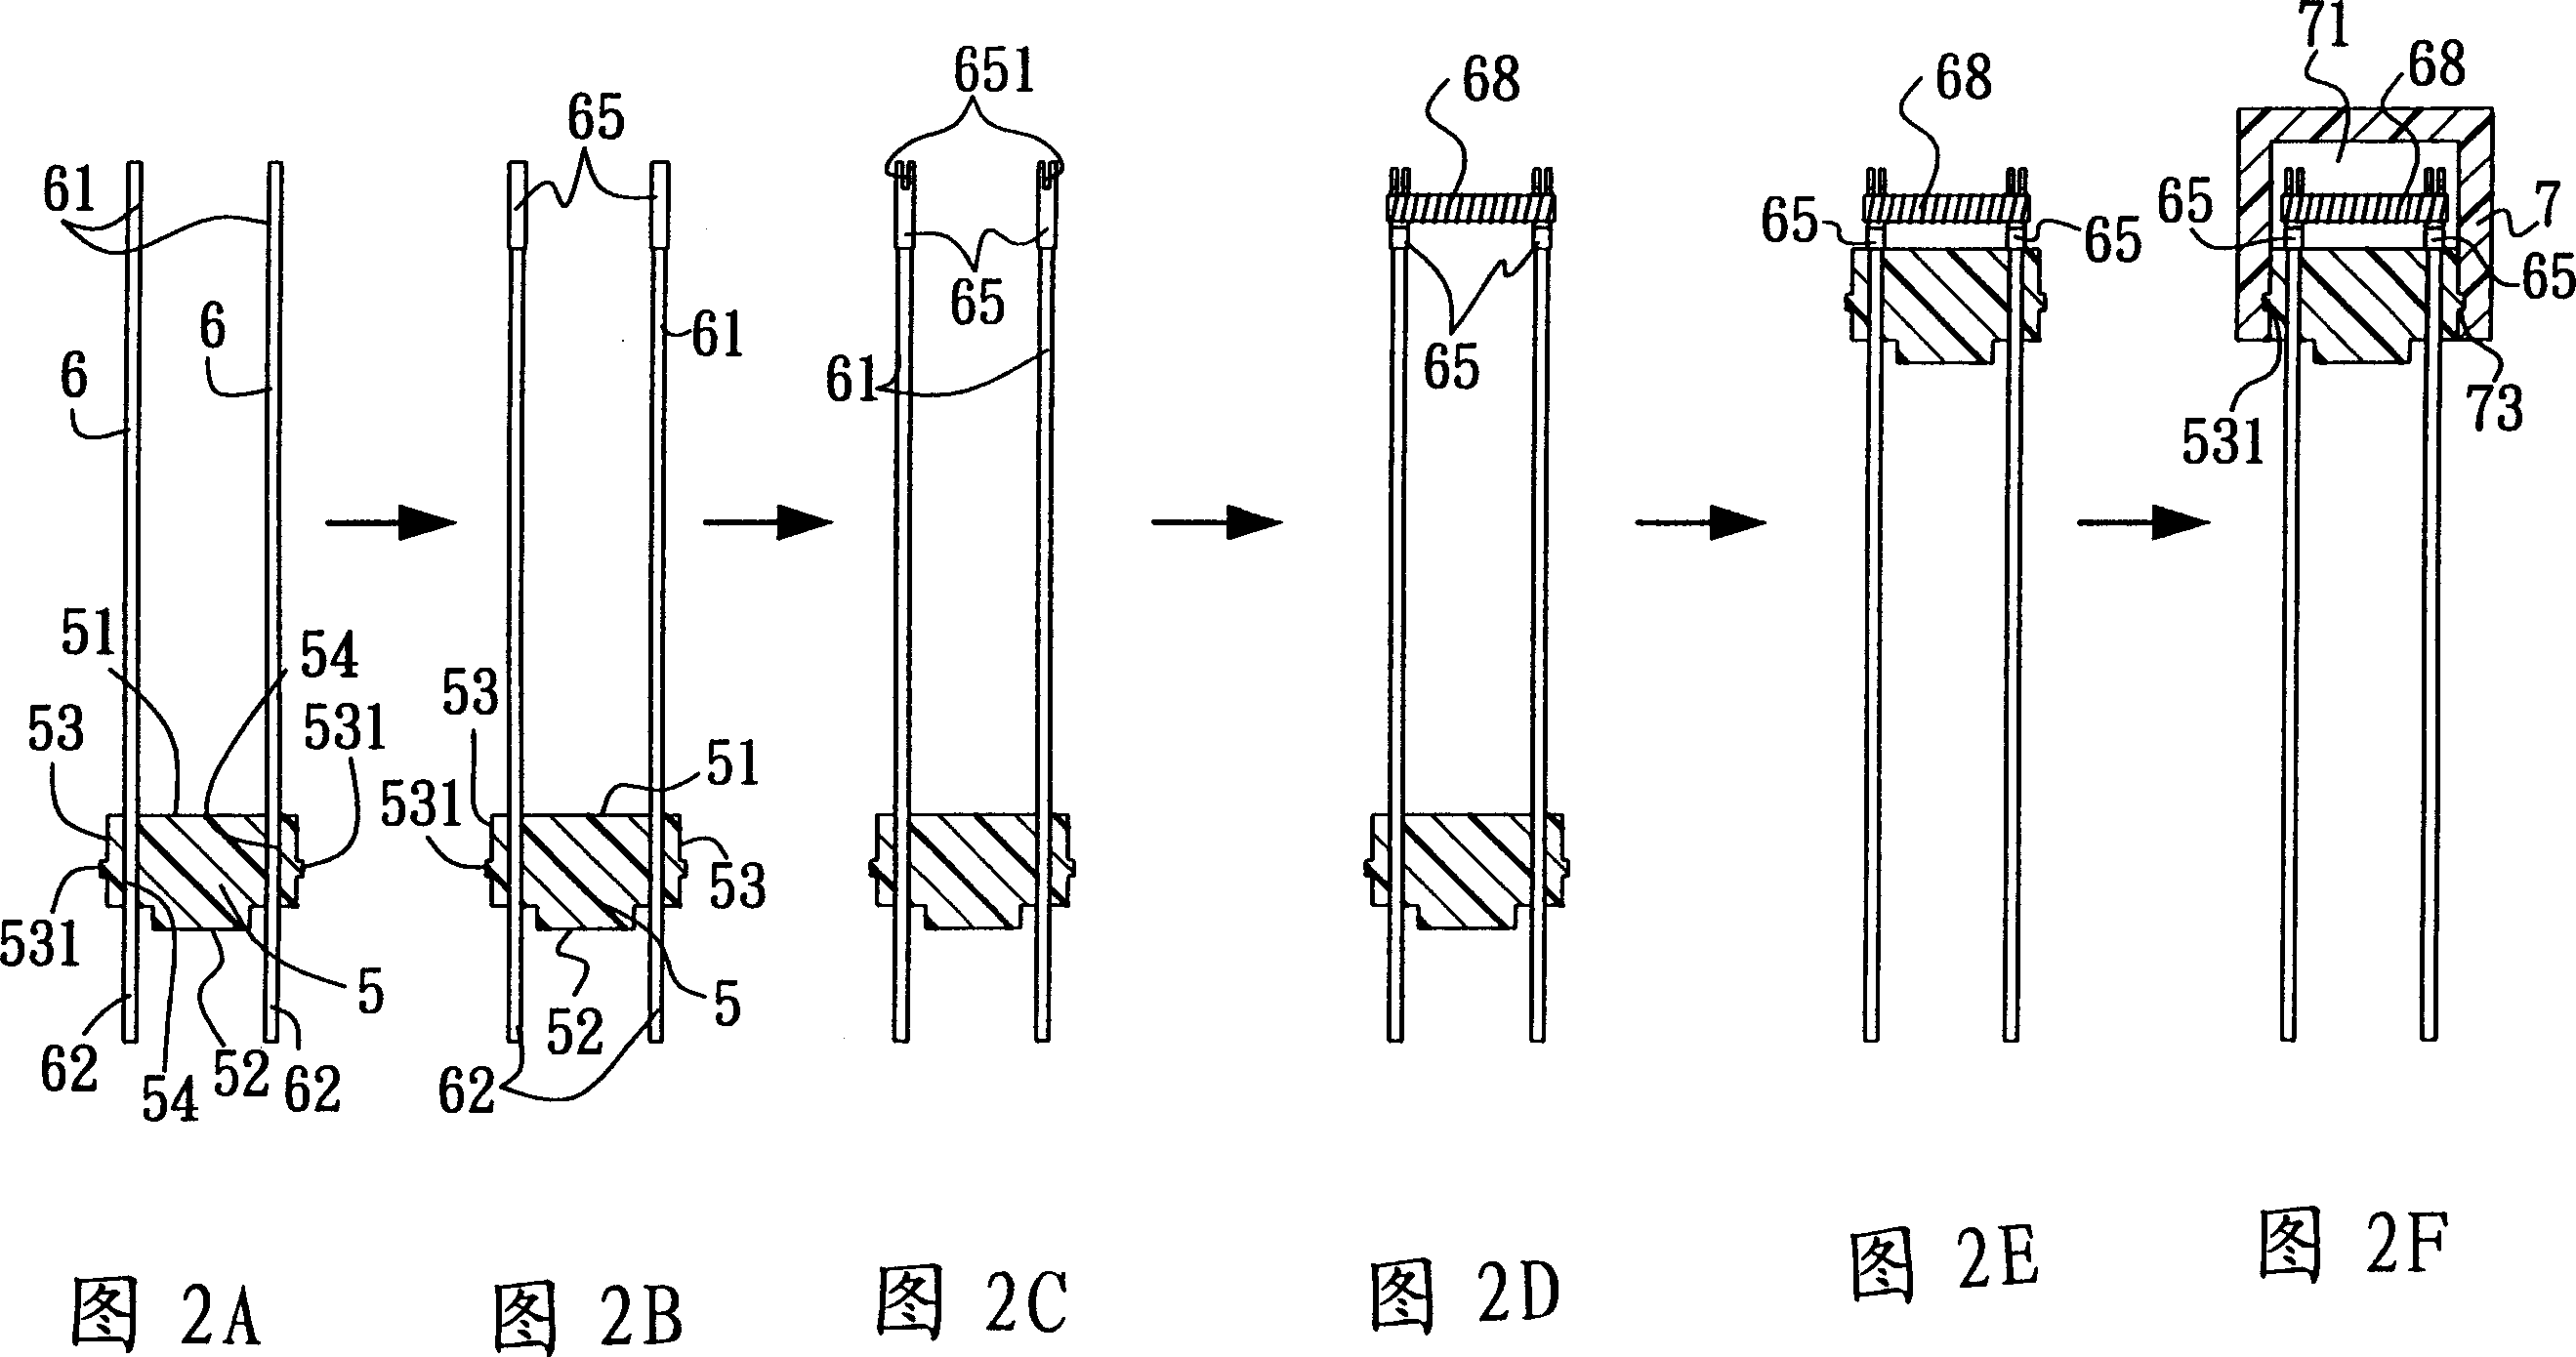 Manufacture of miniature industrial fuse